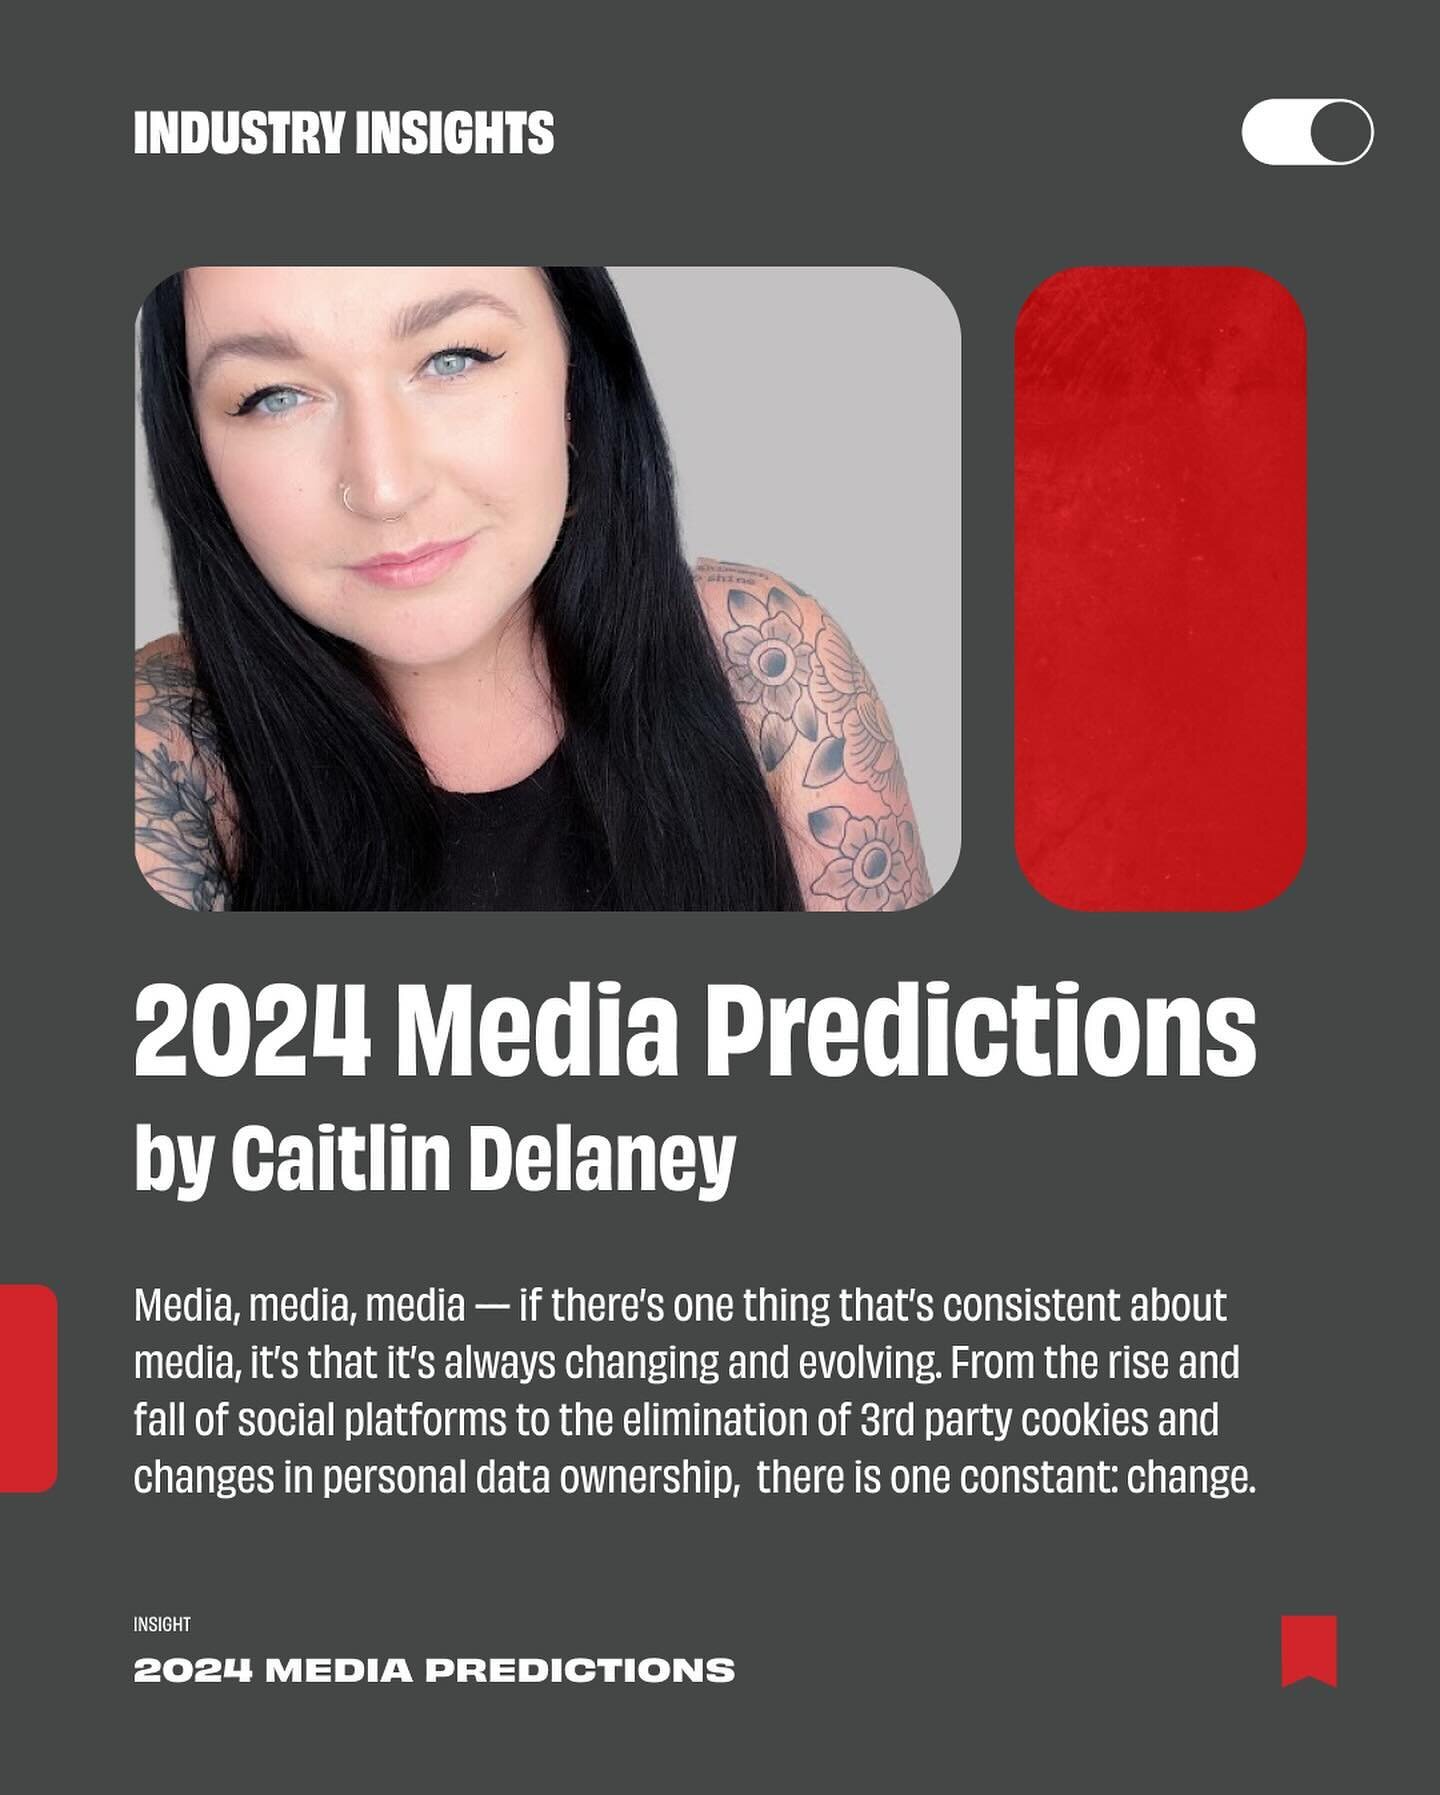 2024 Media predictions by our in-house expert, @caitlin_delano 🔮. Swipe through for industry insights ✍

#cutwateragency 
#industryinsights